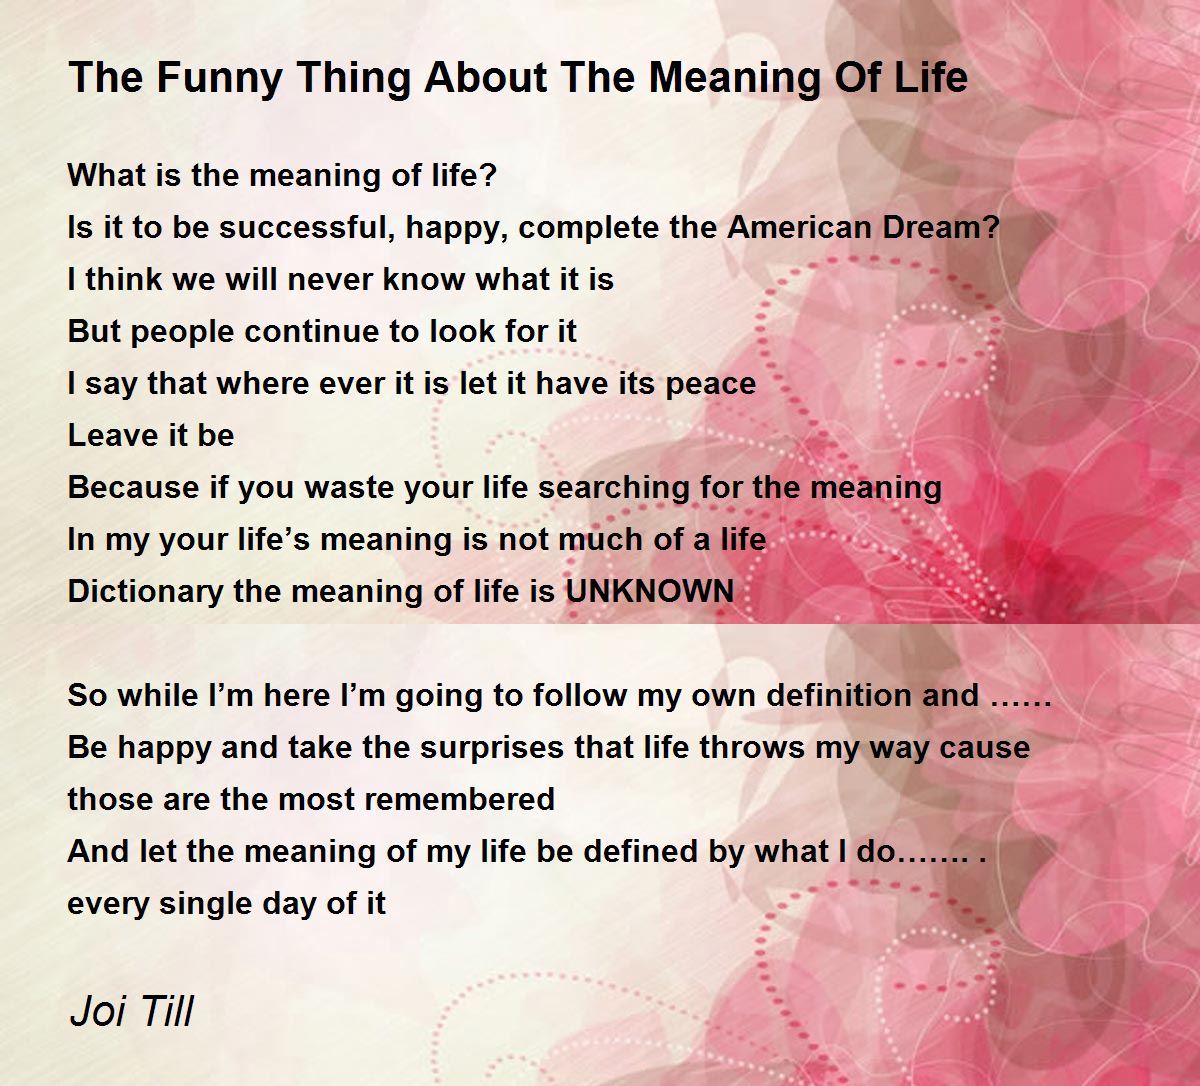 The Funny Thing About The Meaning Of Life - The Funny Thing About The  Meaning Of Life Poem by Joi Till